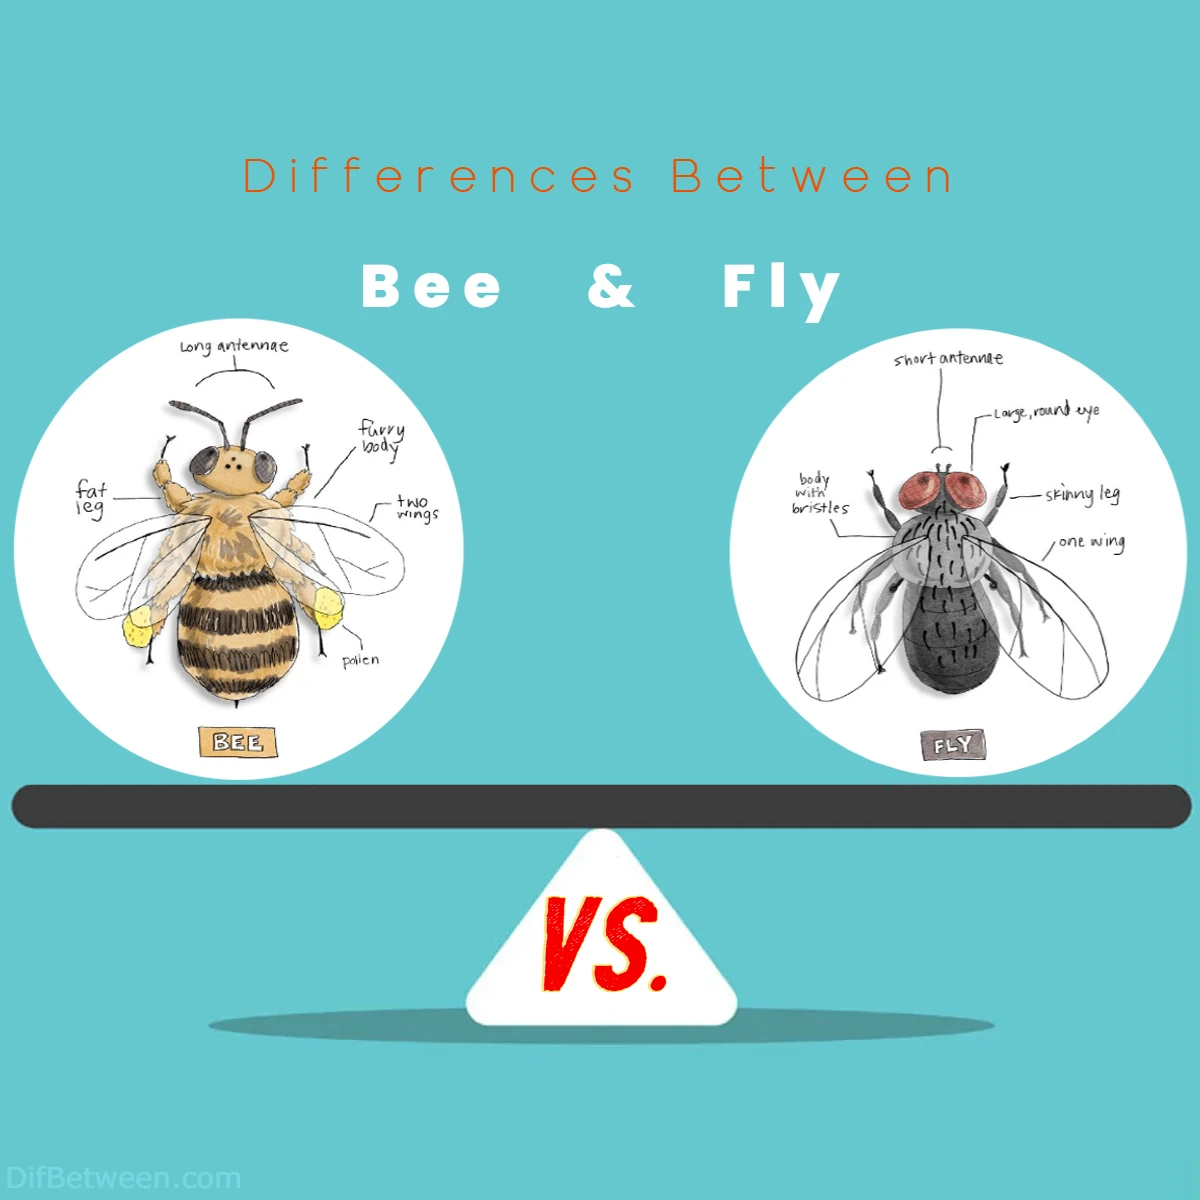 Differences Between Bee vs Fly